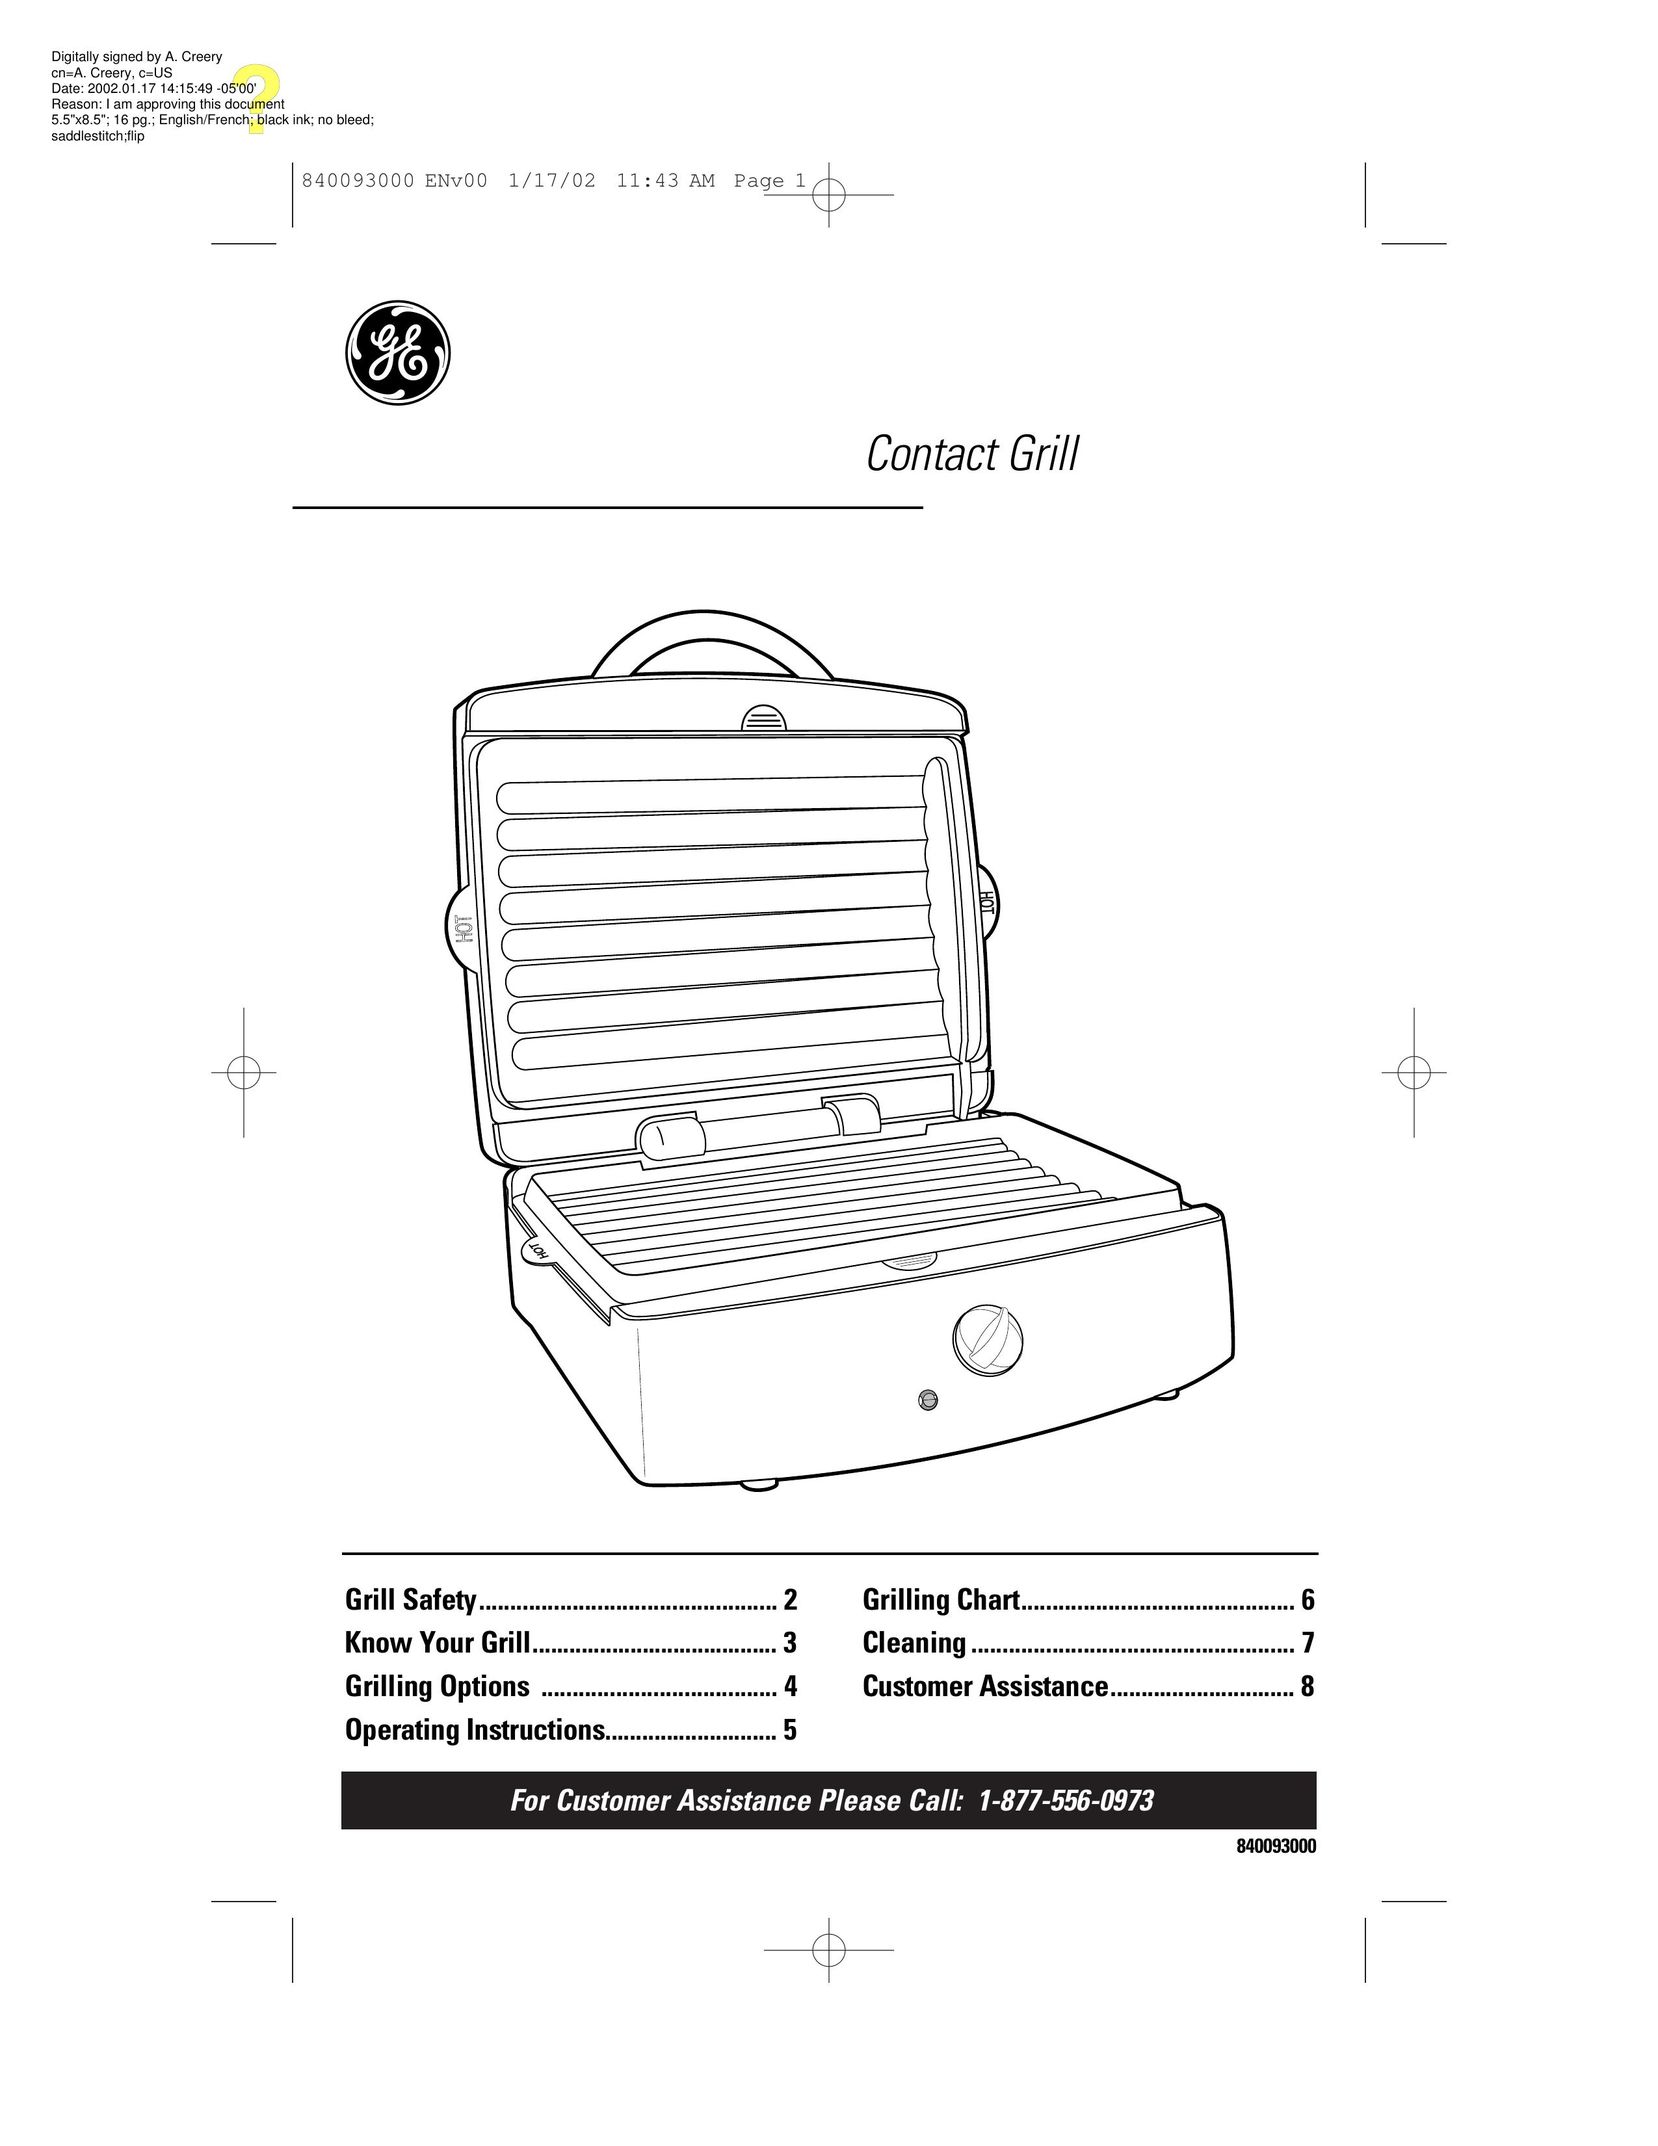 GE 106668 Kitchen Grill User Manual